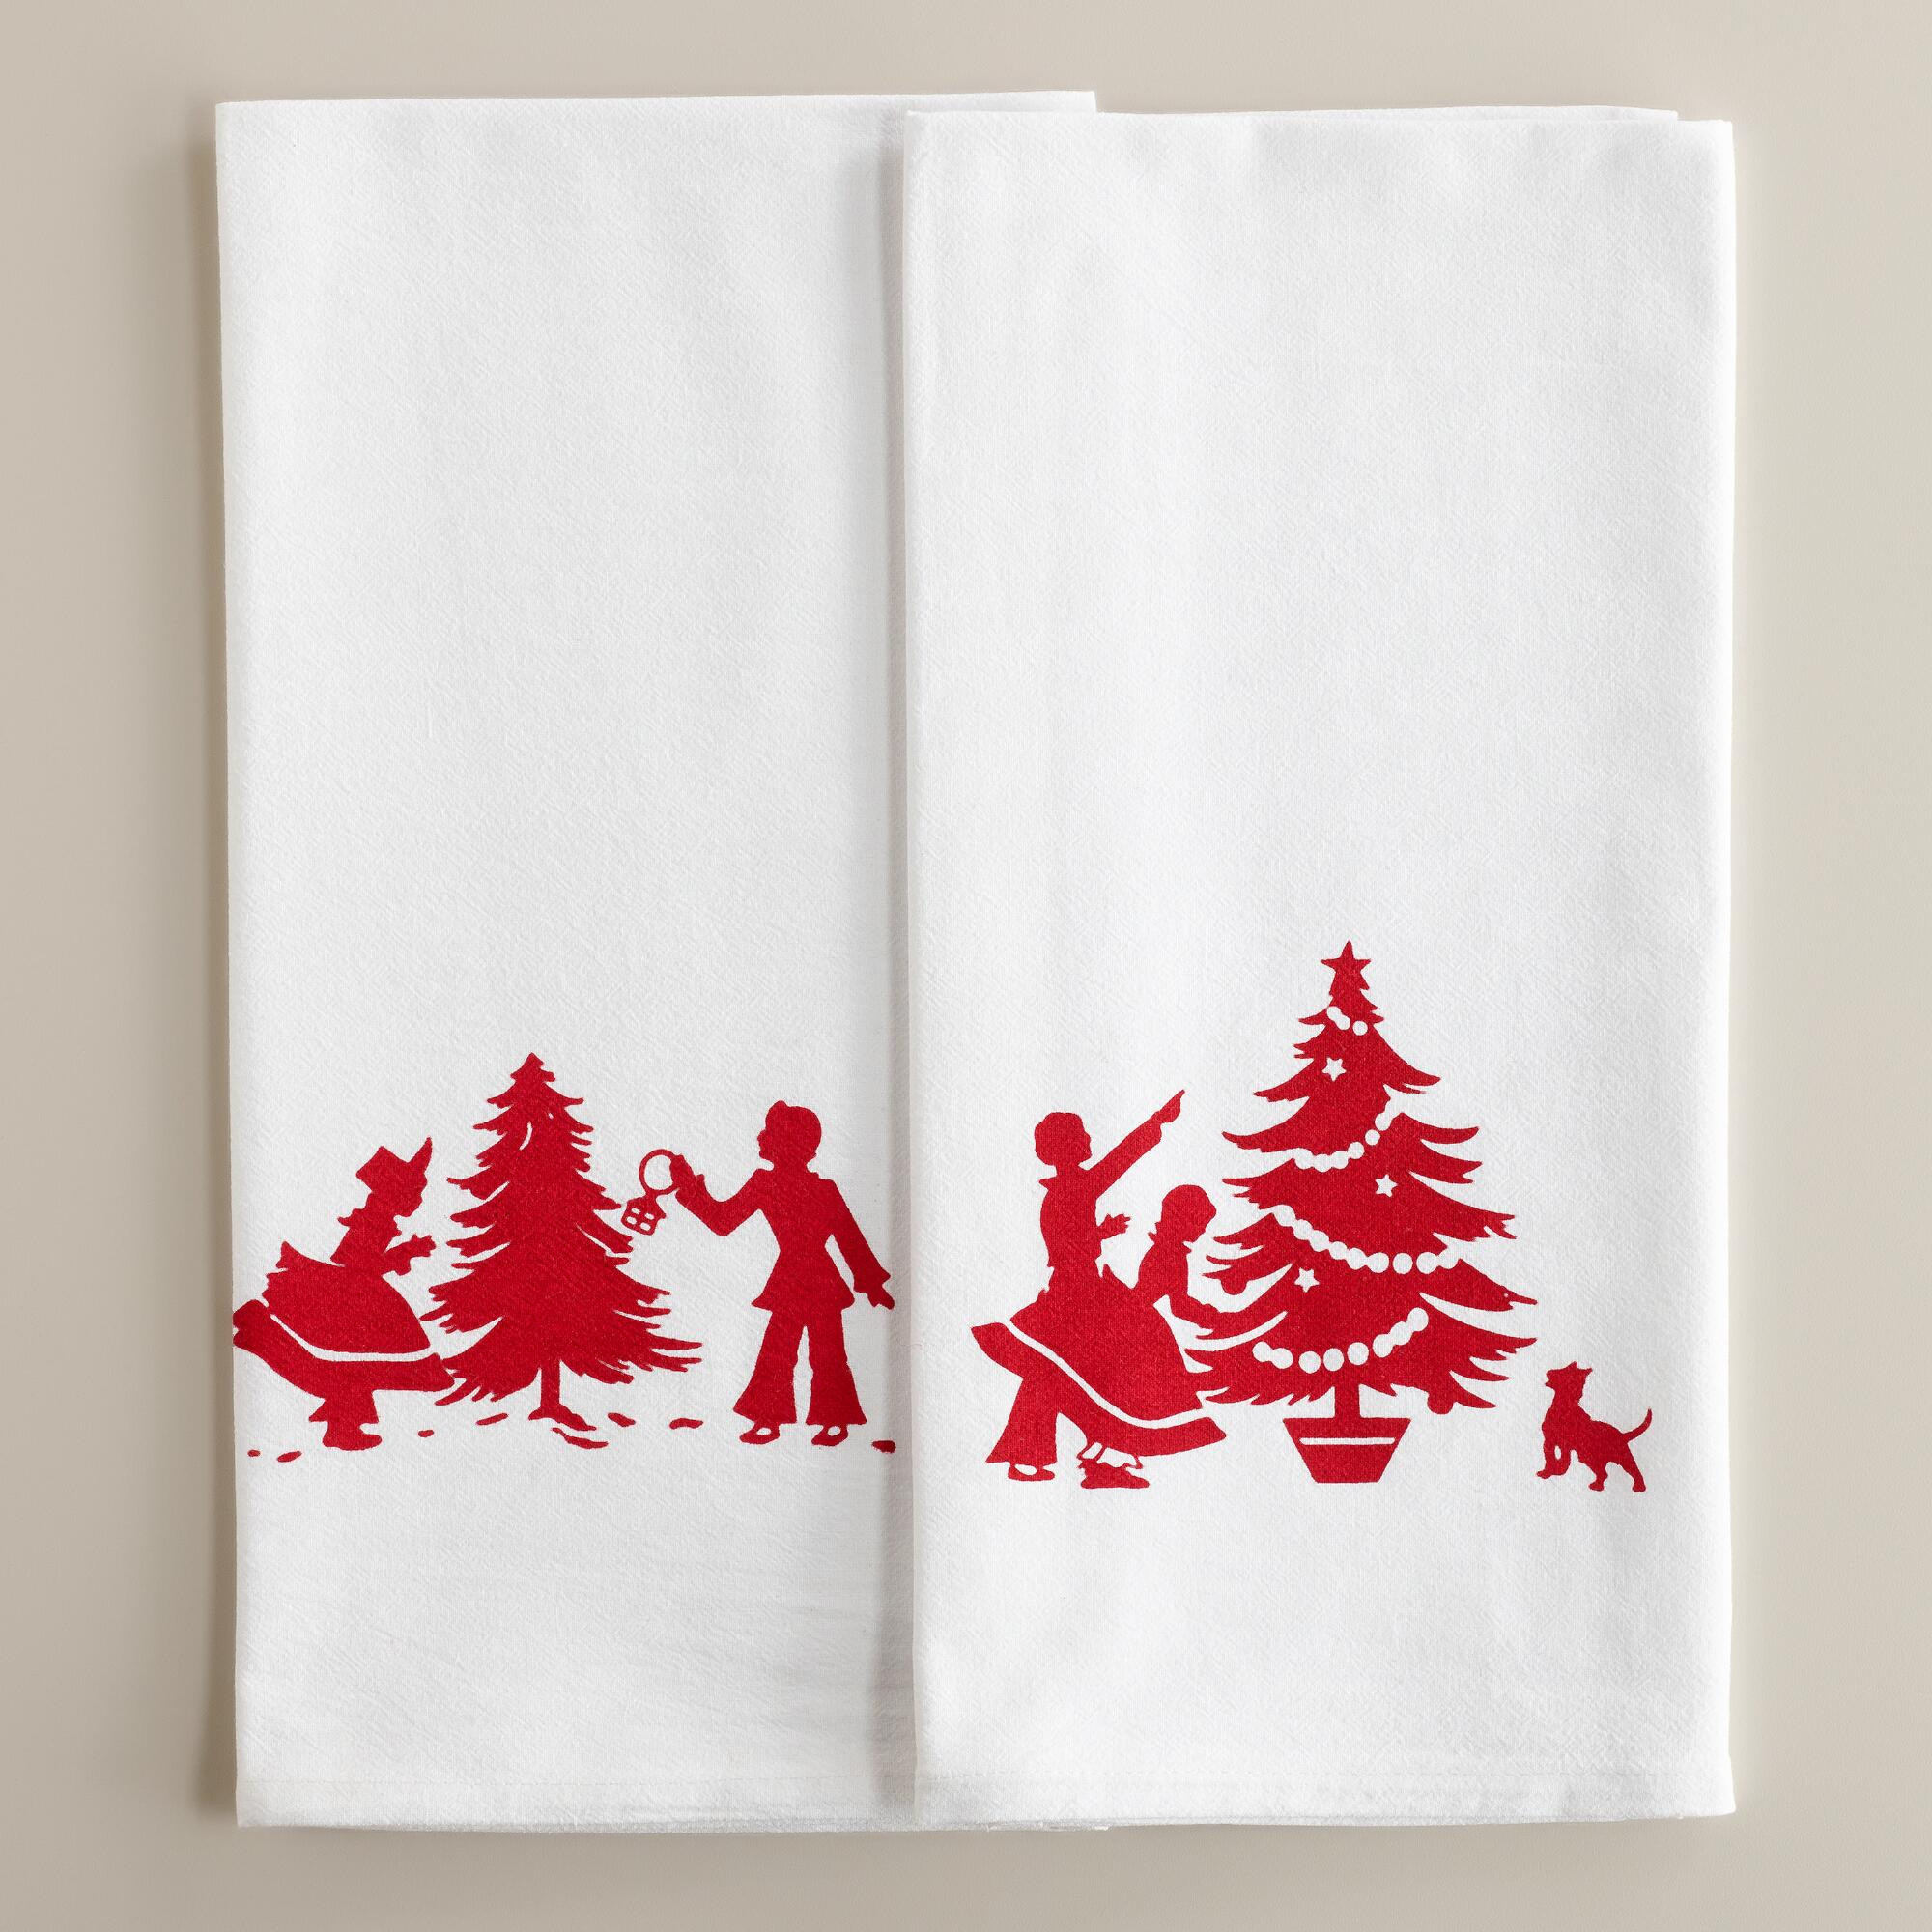 Christmas Kitchen Towels
 Upstairs Downstairs Christmas Kitchen Towels